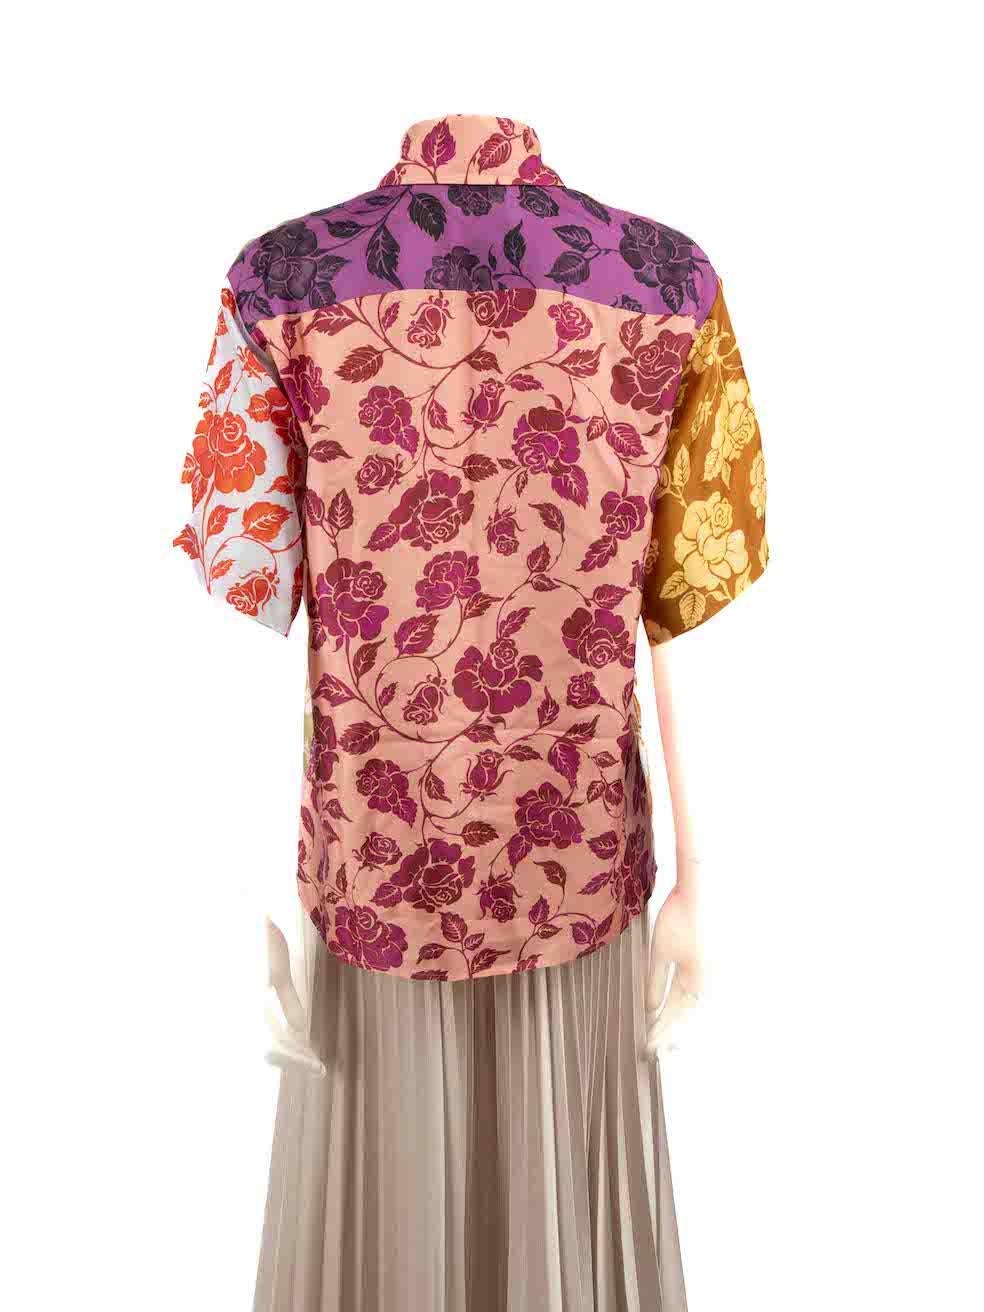 Zimmermann Floral Silk The Lovestruck Silk Shirt Size M In Excellent Condition For Sale In London, GB